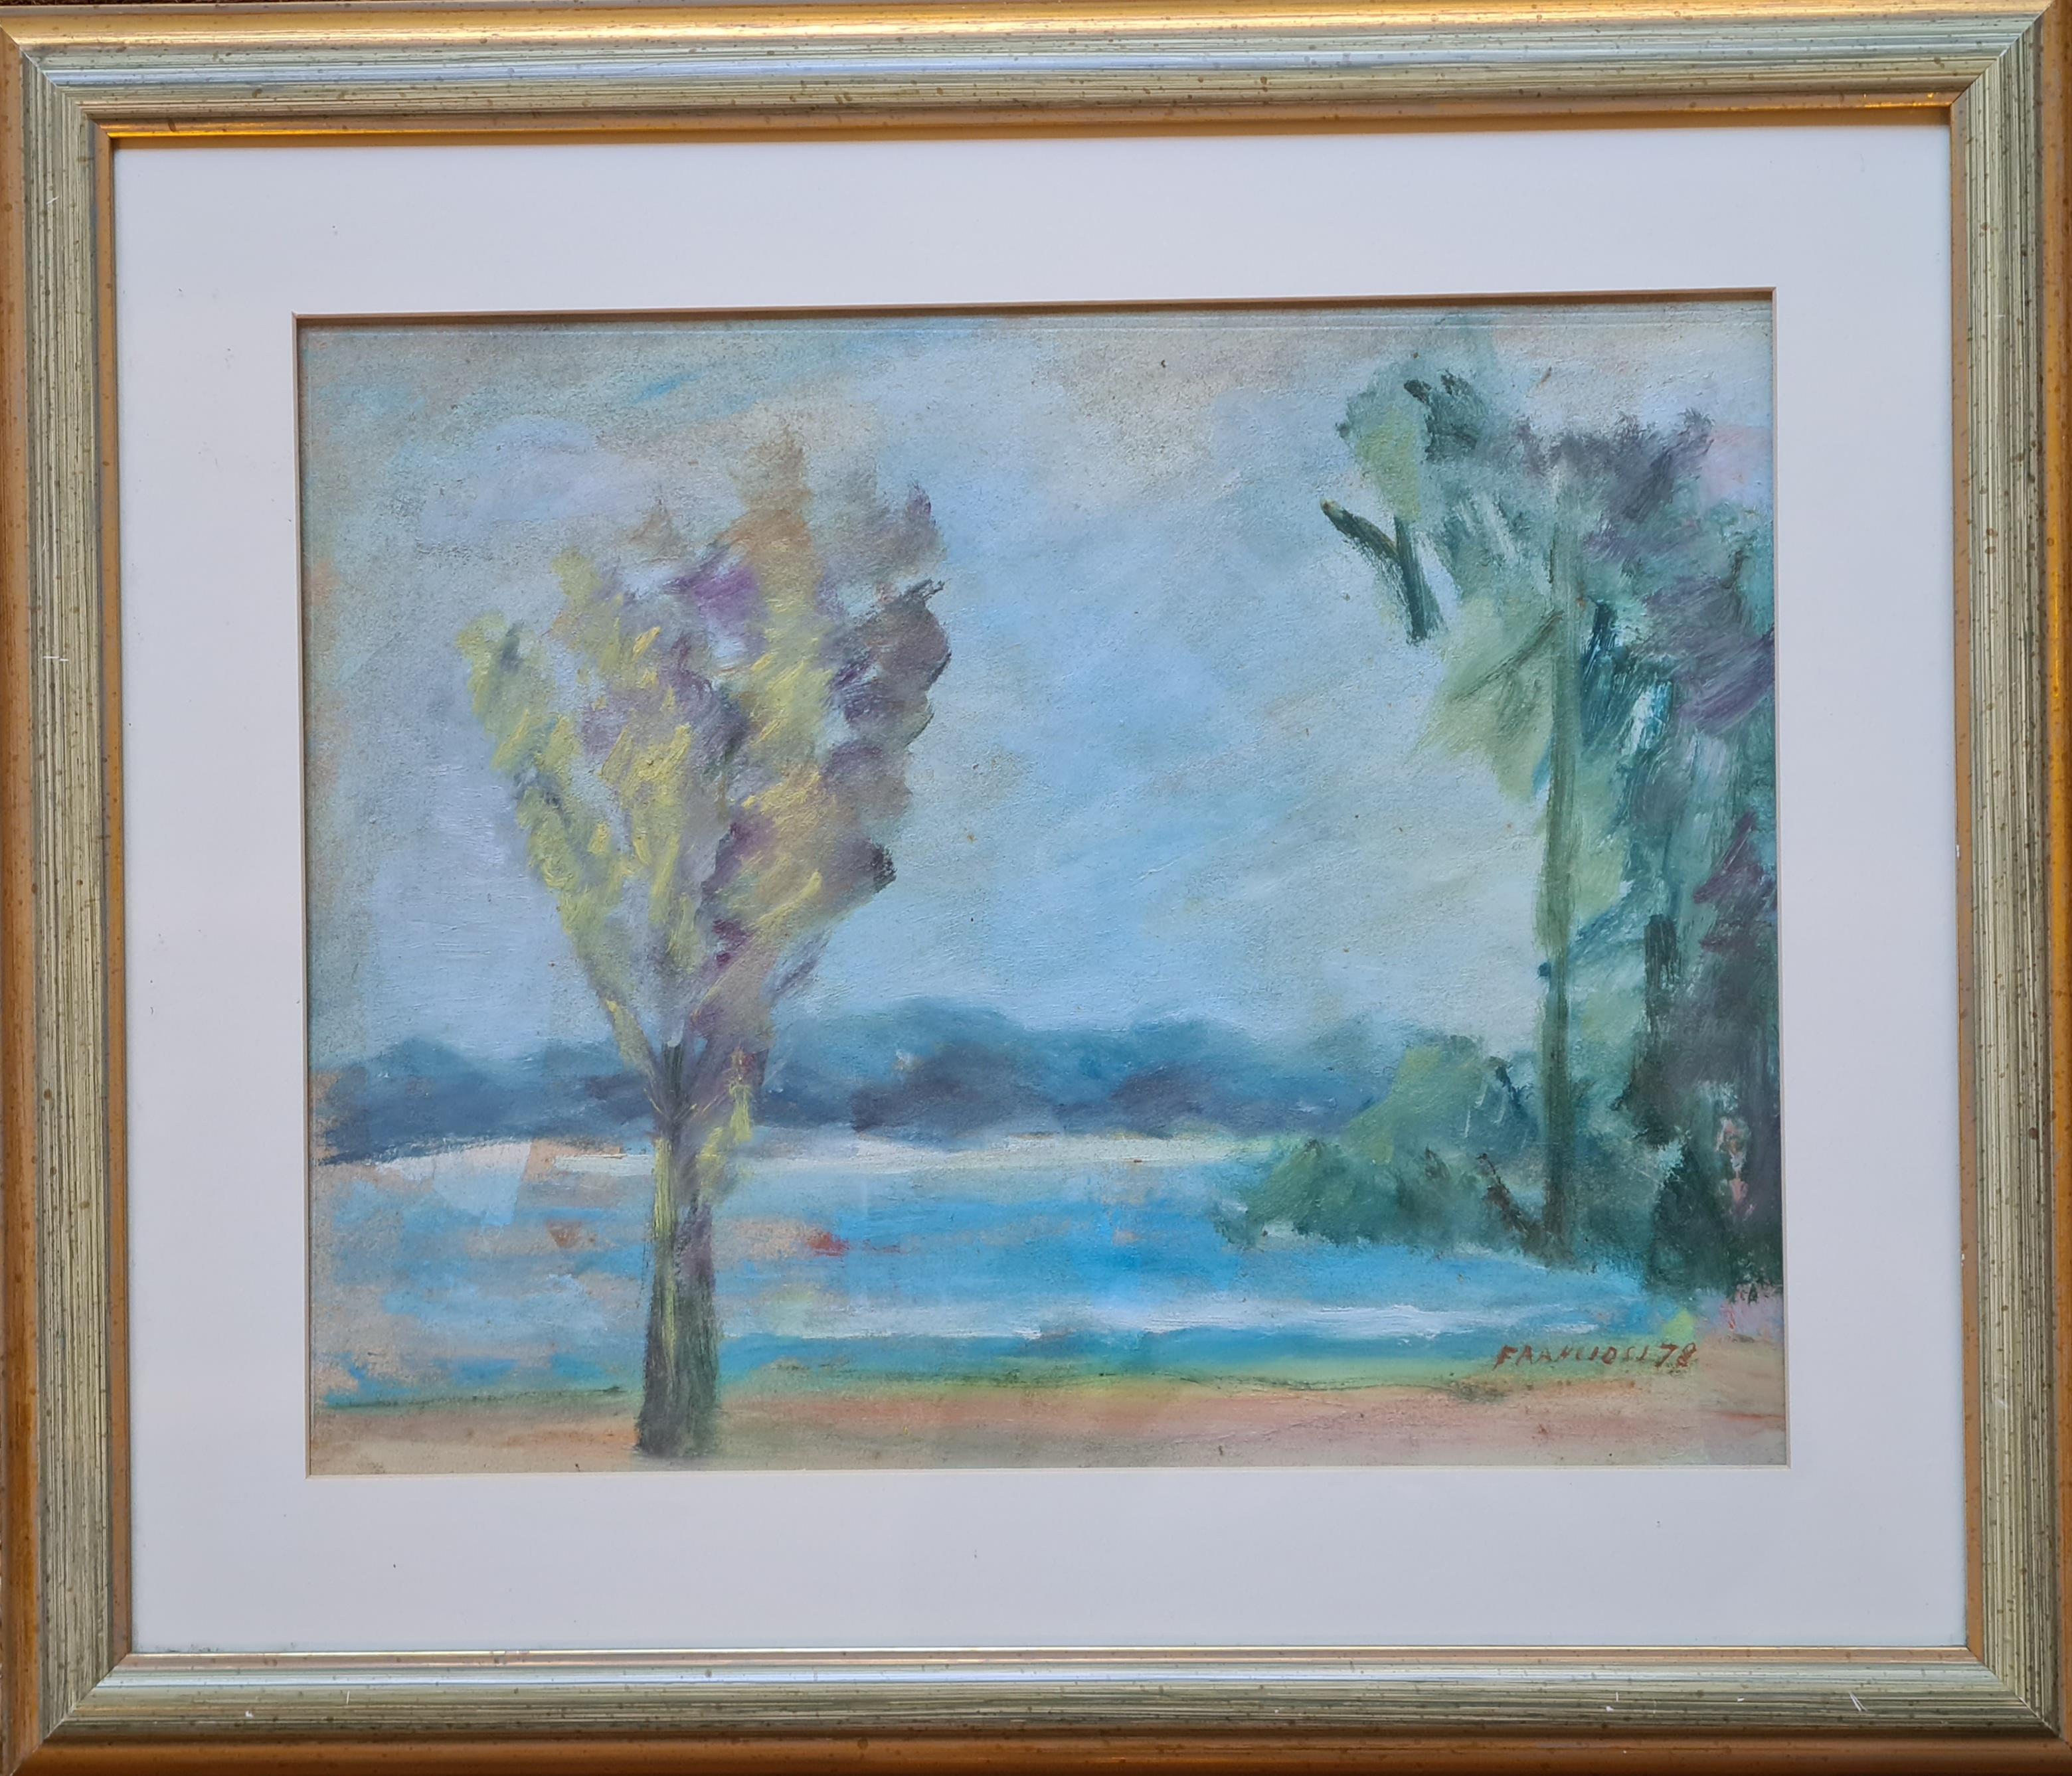 Impressionist Lakeside River Scene - Painting by Franciosi